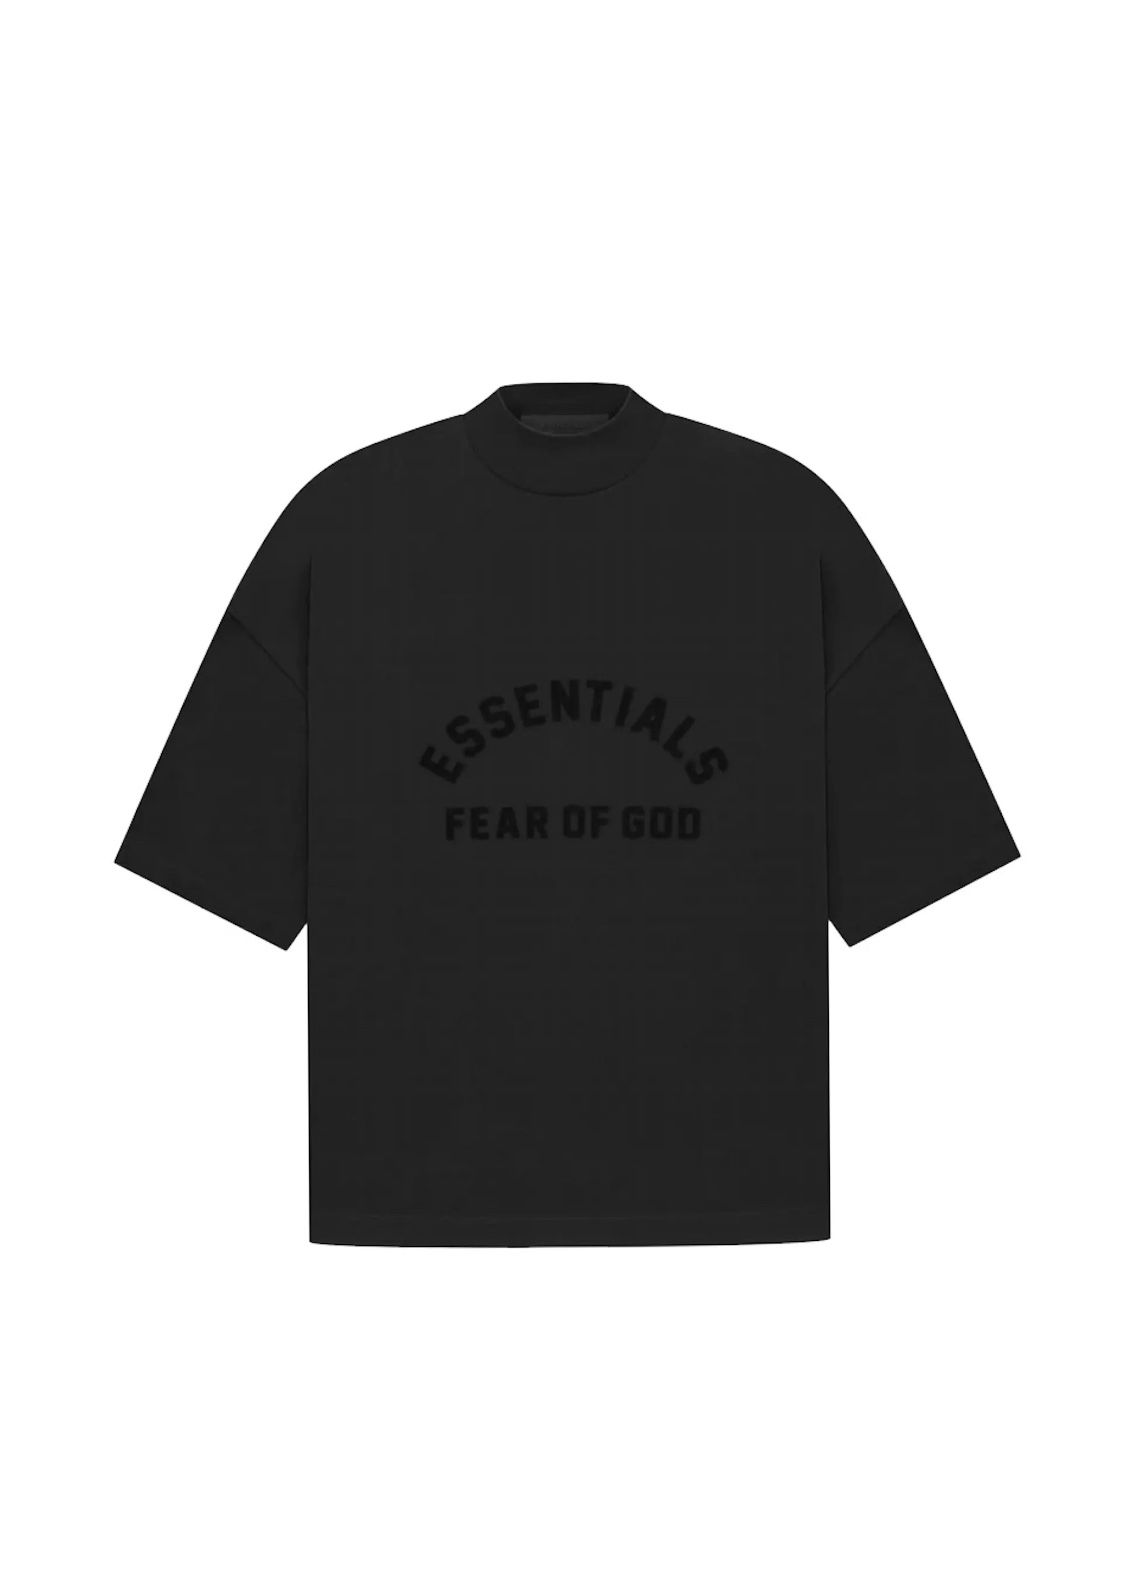 BRAND NEW WITH TAGS Essentials Fear Of God Shirt 